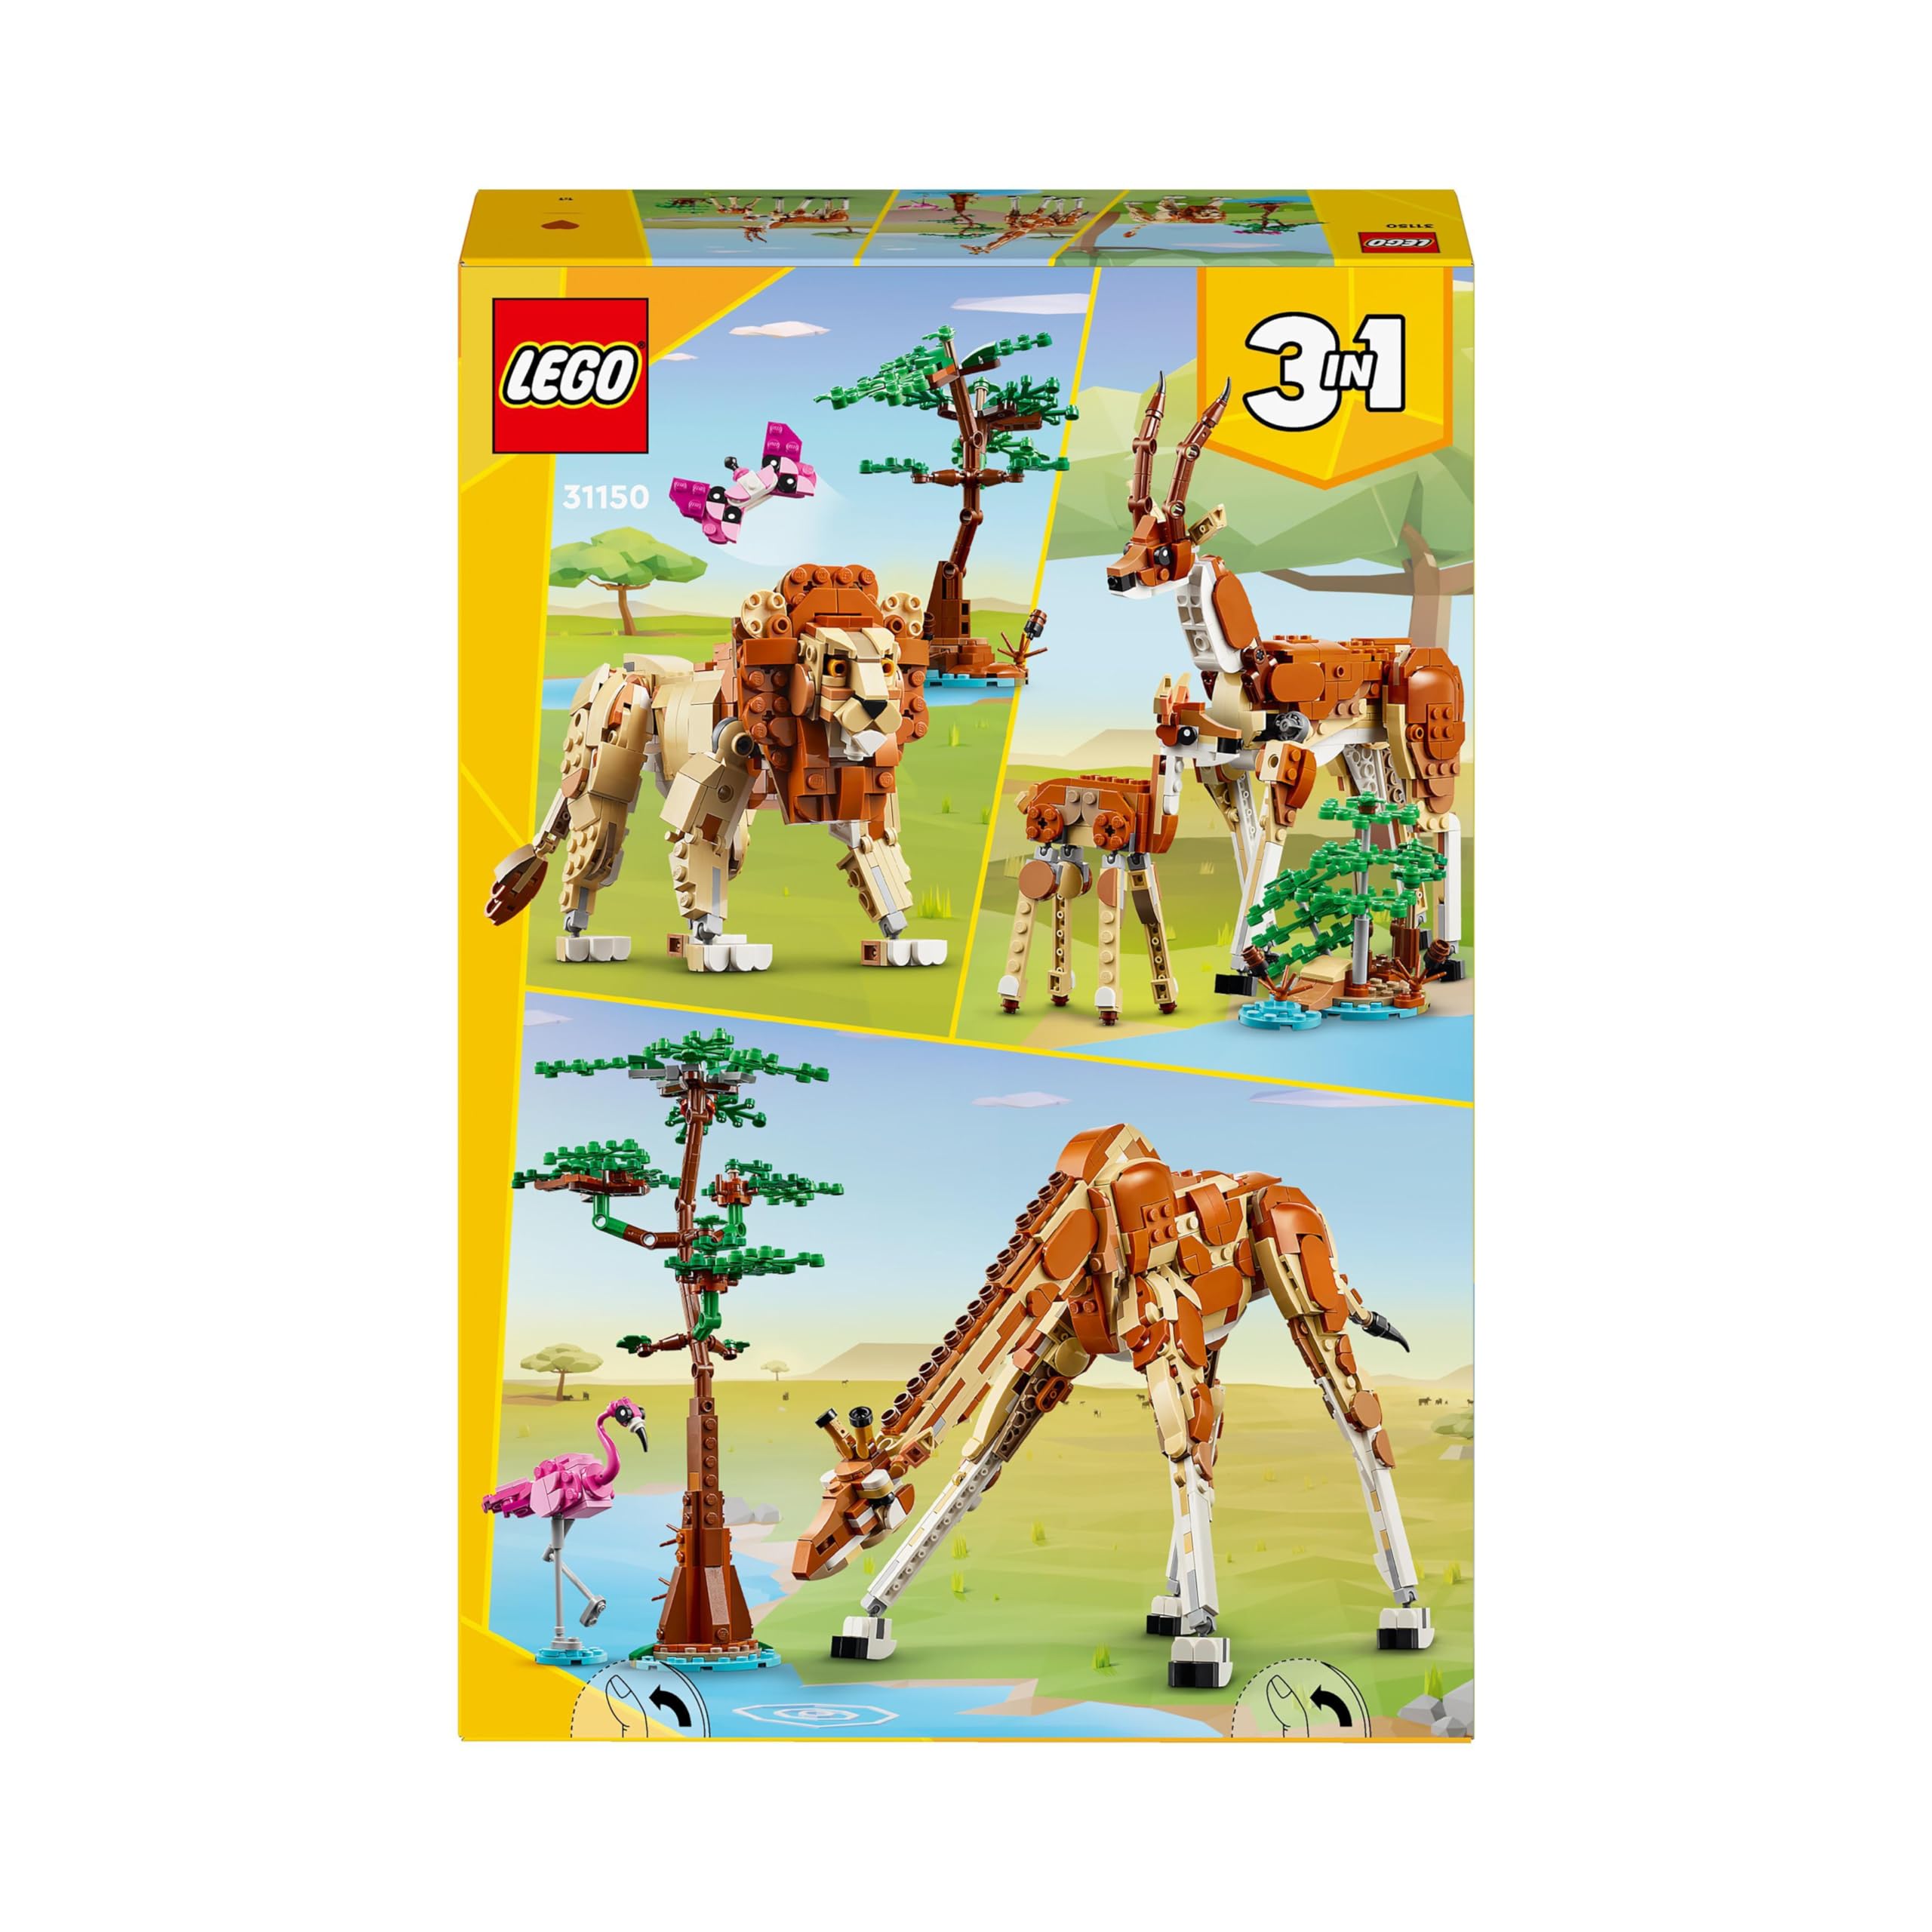 LEGO Creator 3in1 Wild Safari Animals, Giraffe Toy to Gazelle Figures to Lion Model, Set for Kids, Girls & Boys Aged 9 Plus, Includes Flamingo and Butterfly, Nature Gifts for Imaginative Play 31150